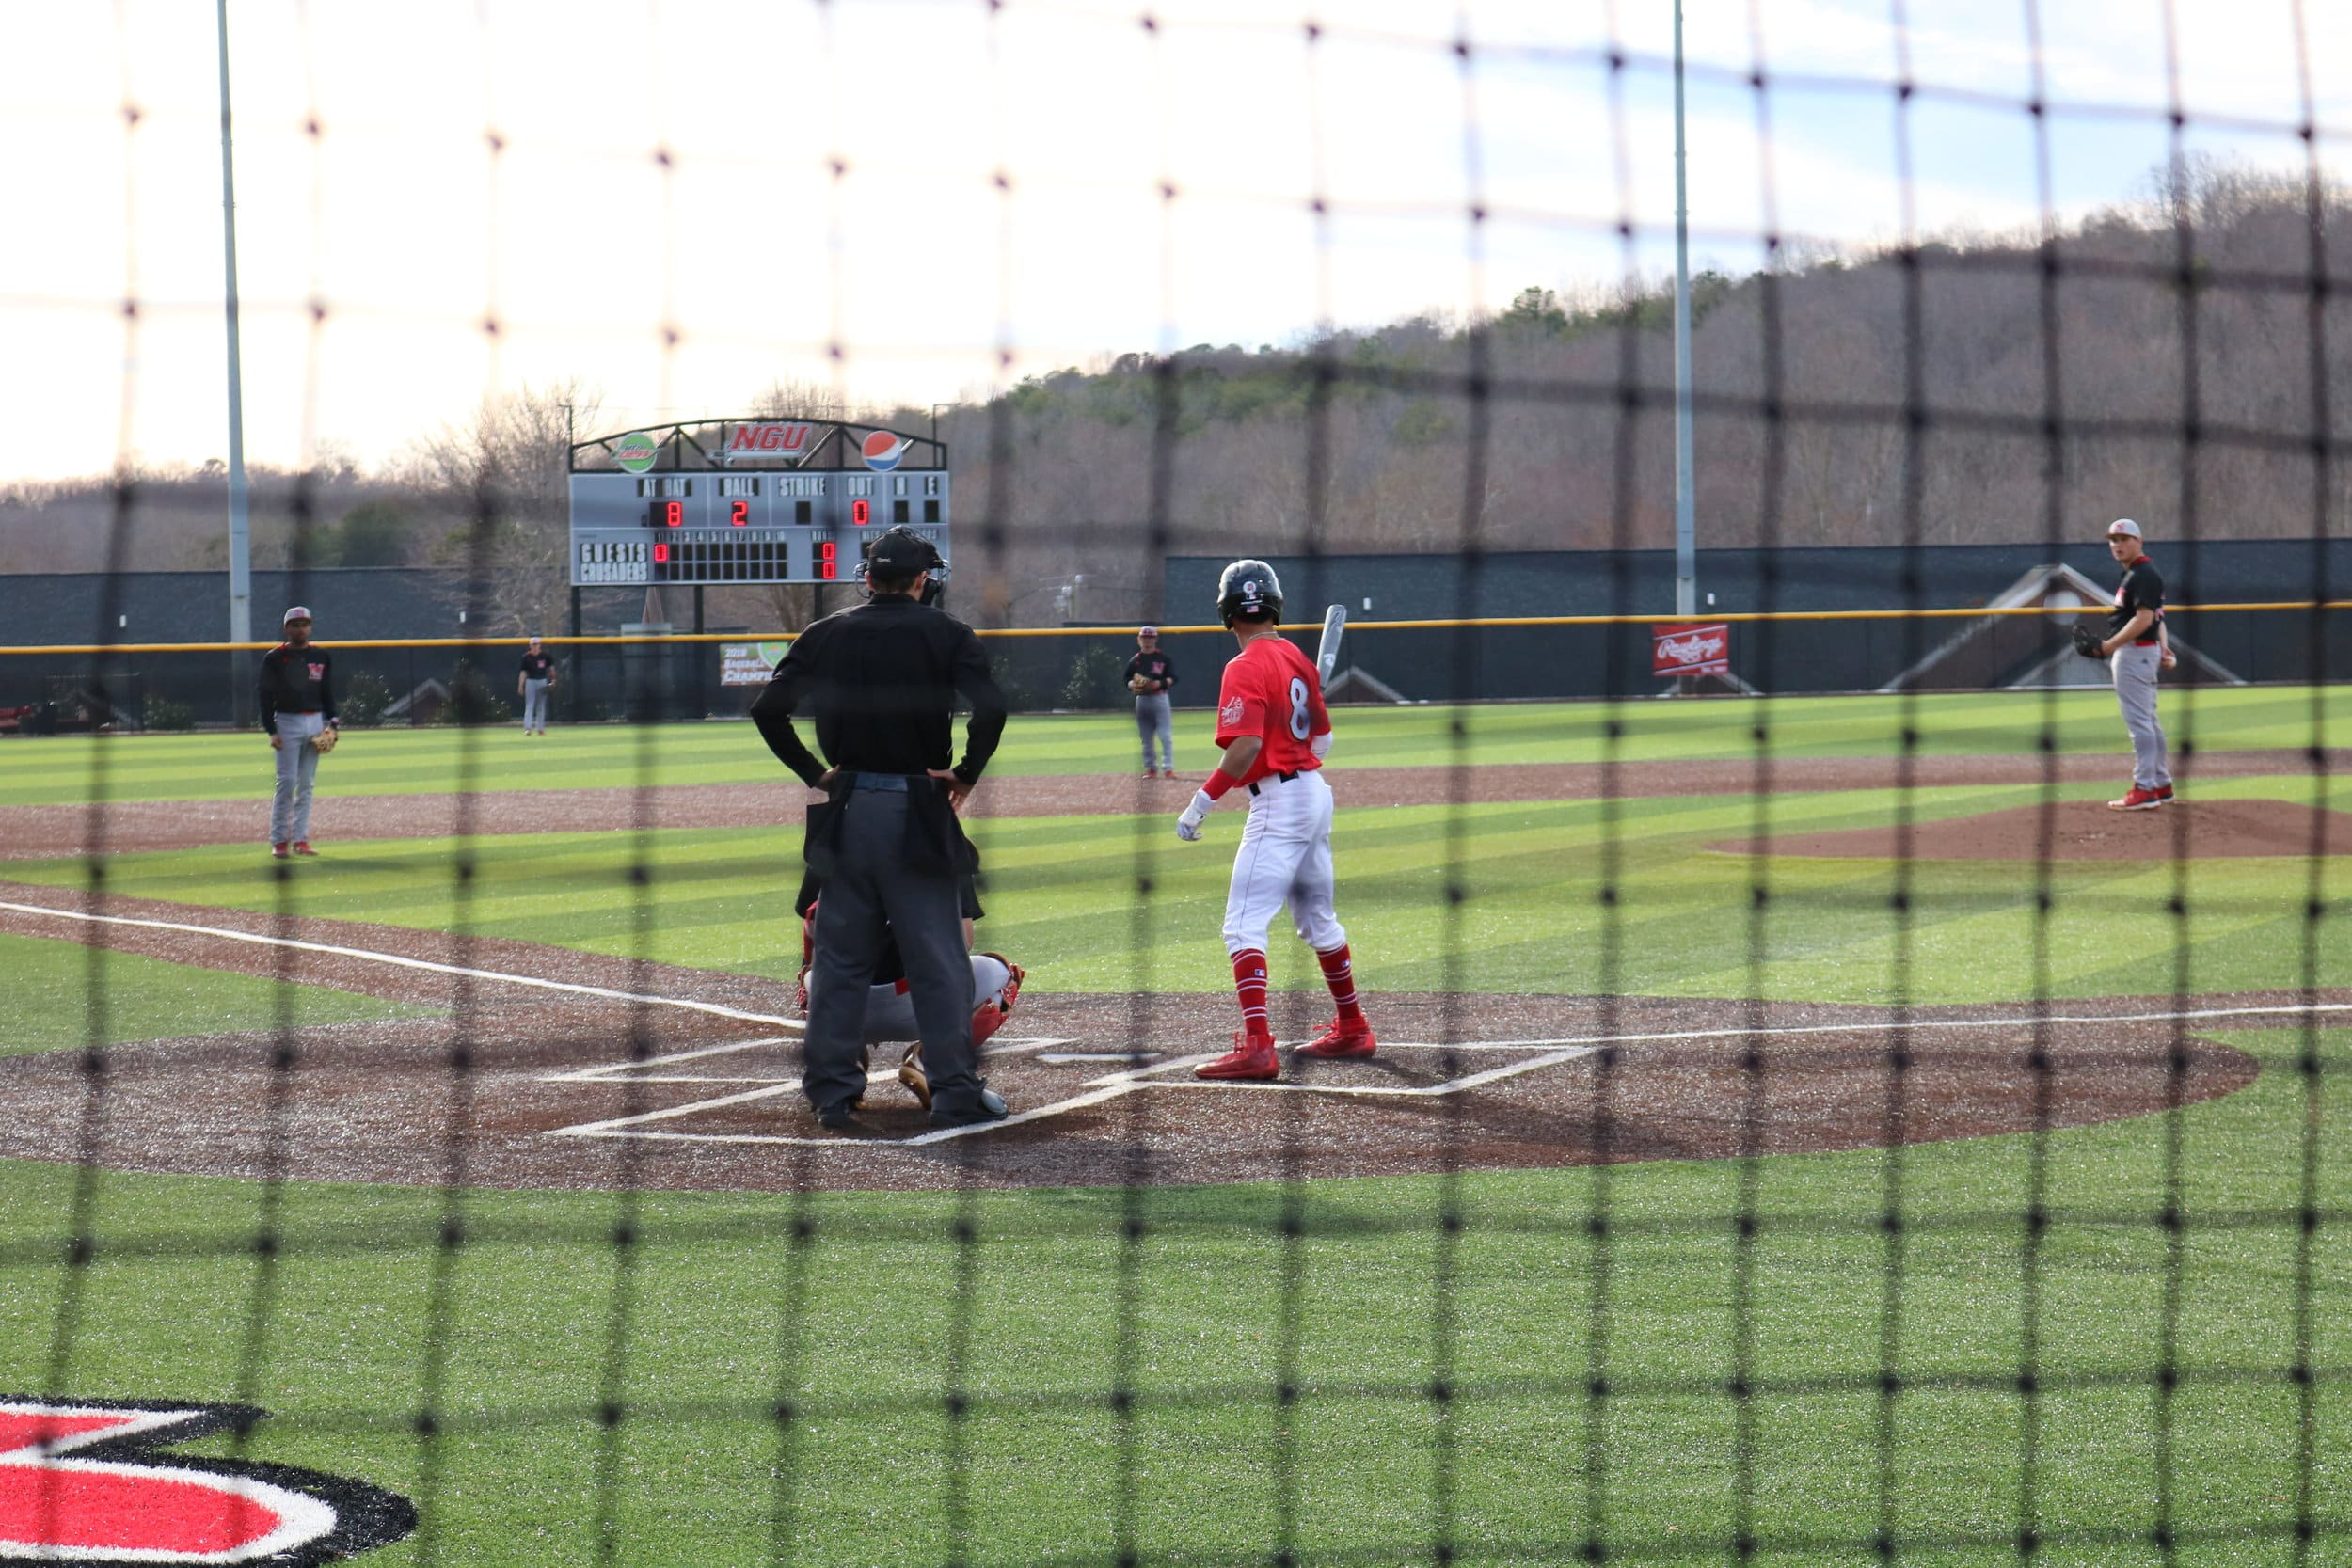 Sophomore Jeremy Whitehead (8) , steps up to bat as the first batter of the season.